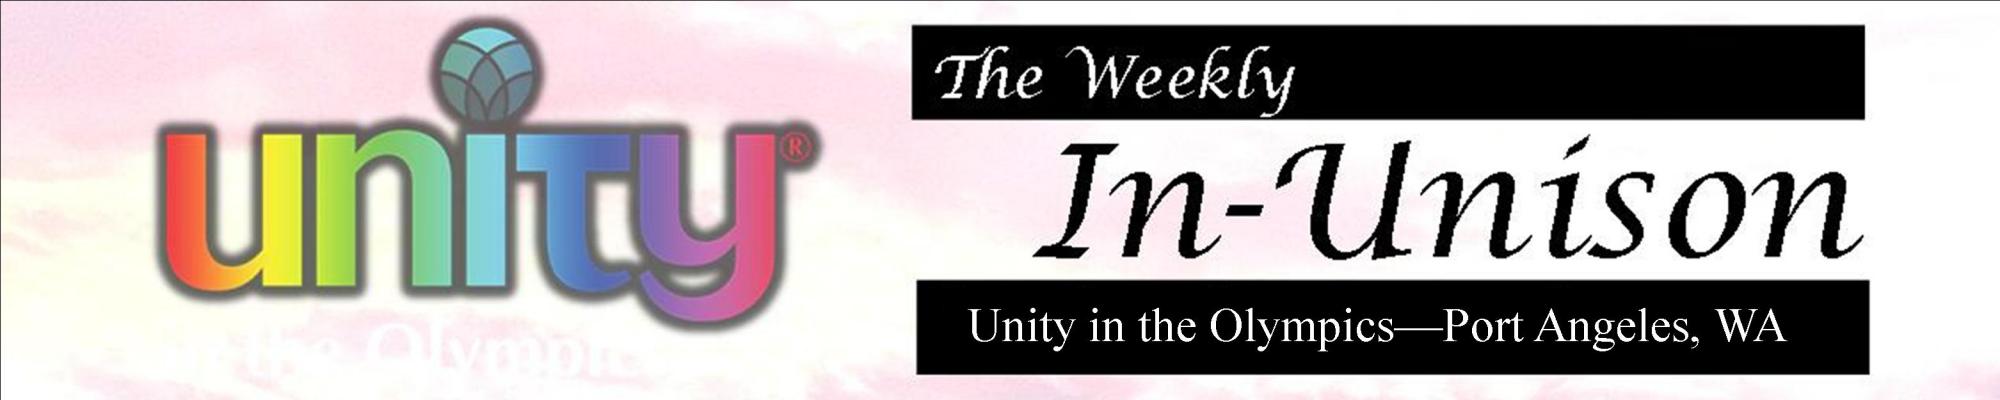 The Weekly IN-UNISON 2023 December 20th Edition